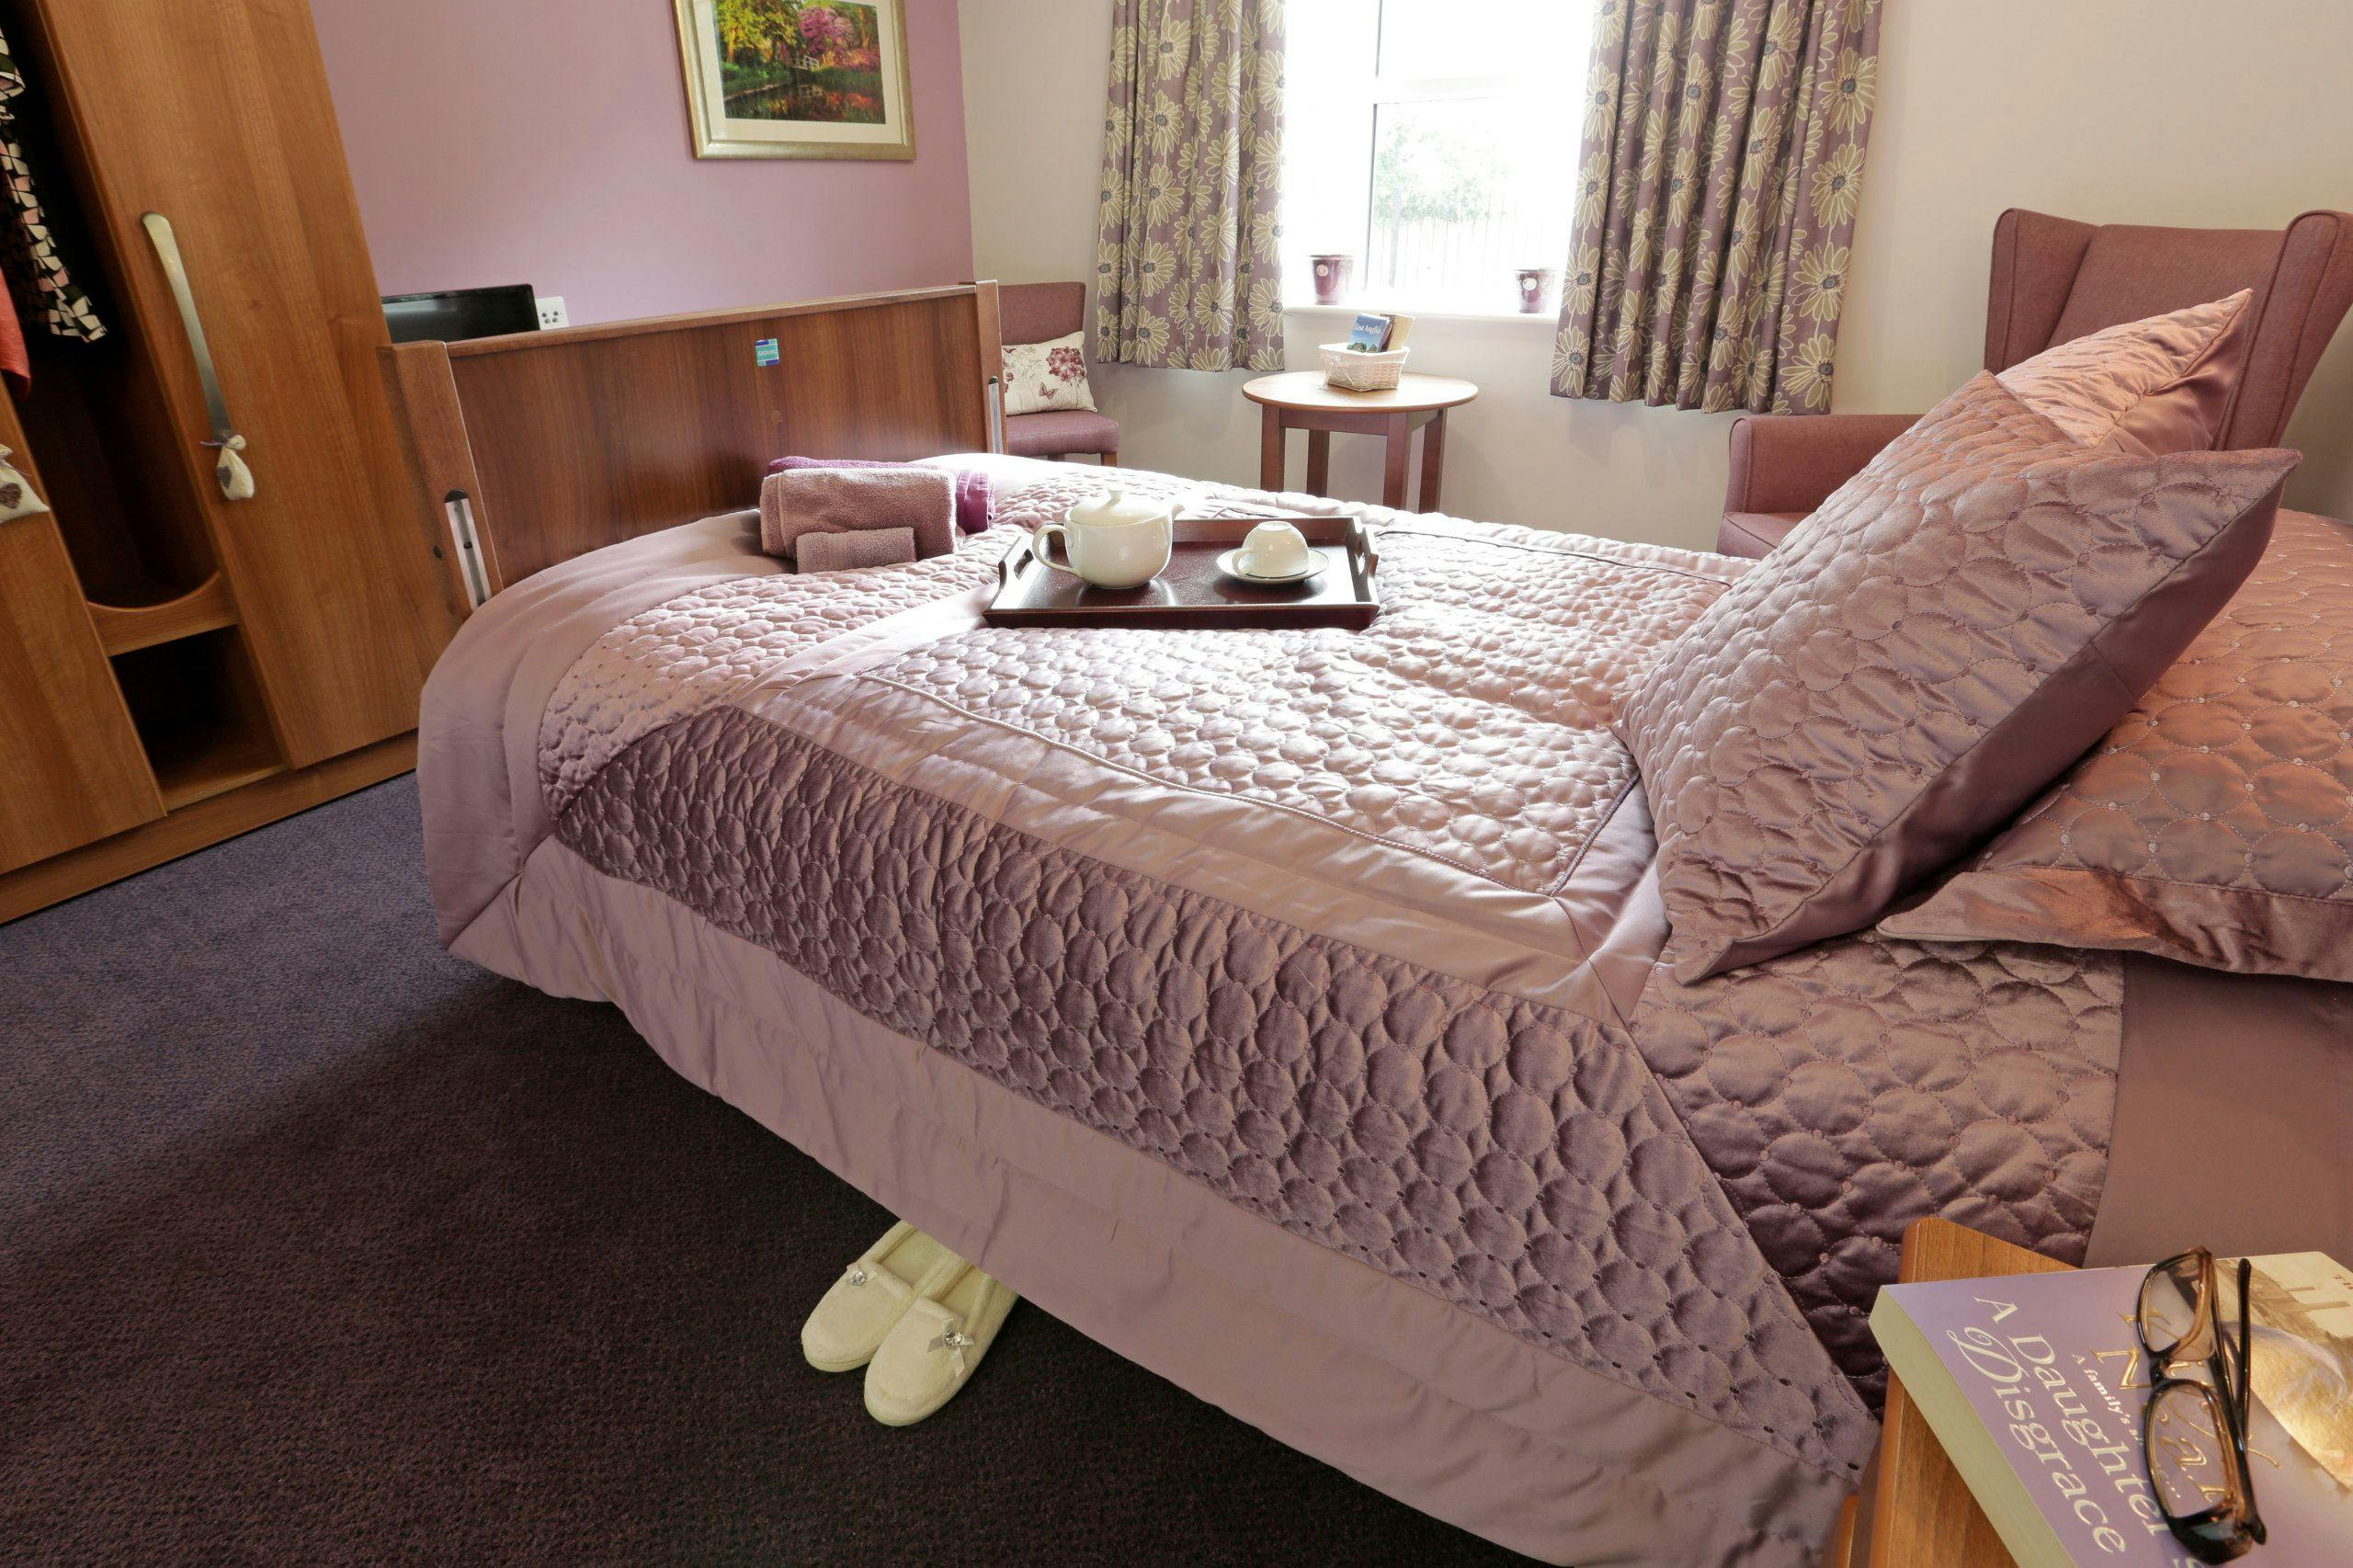 Bedroom at De Lucy House Care Home, Diss, Norfolk